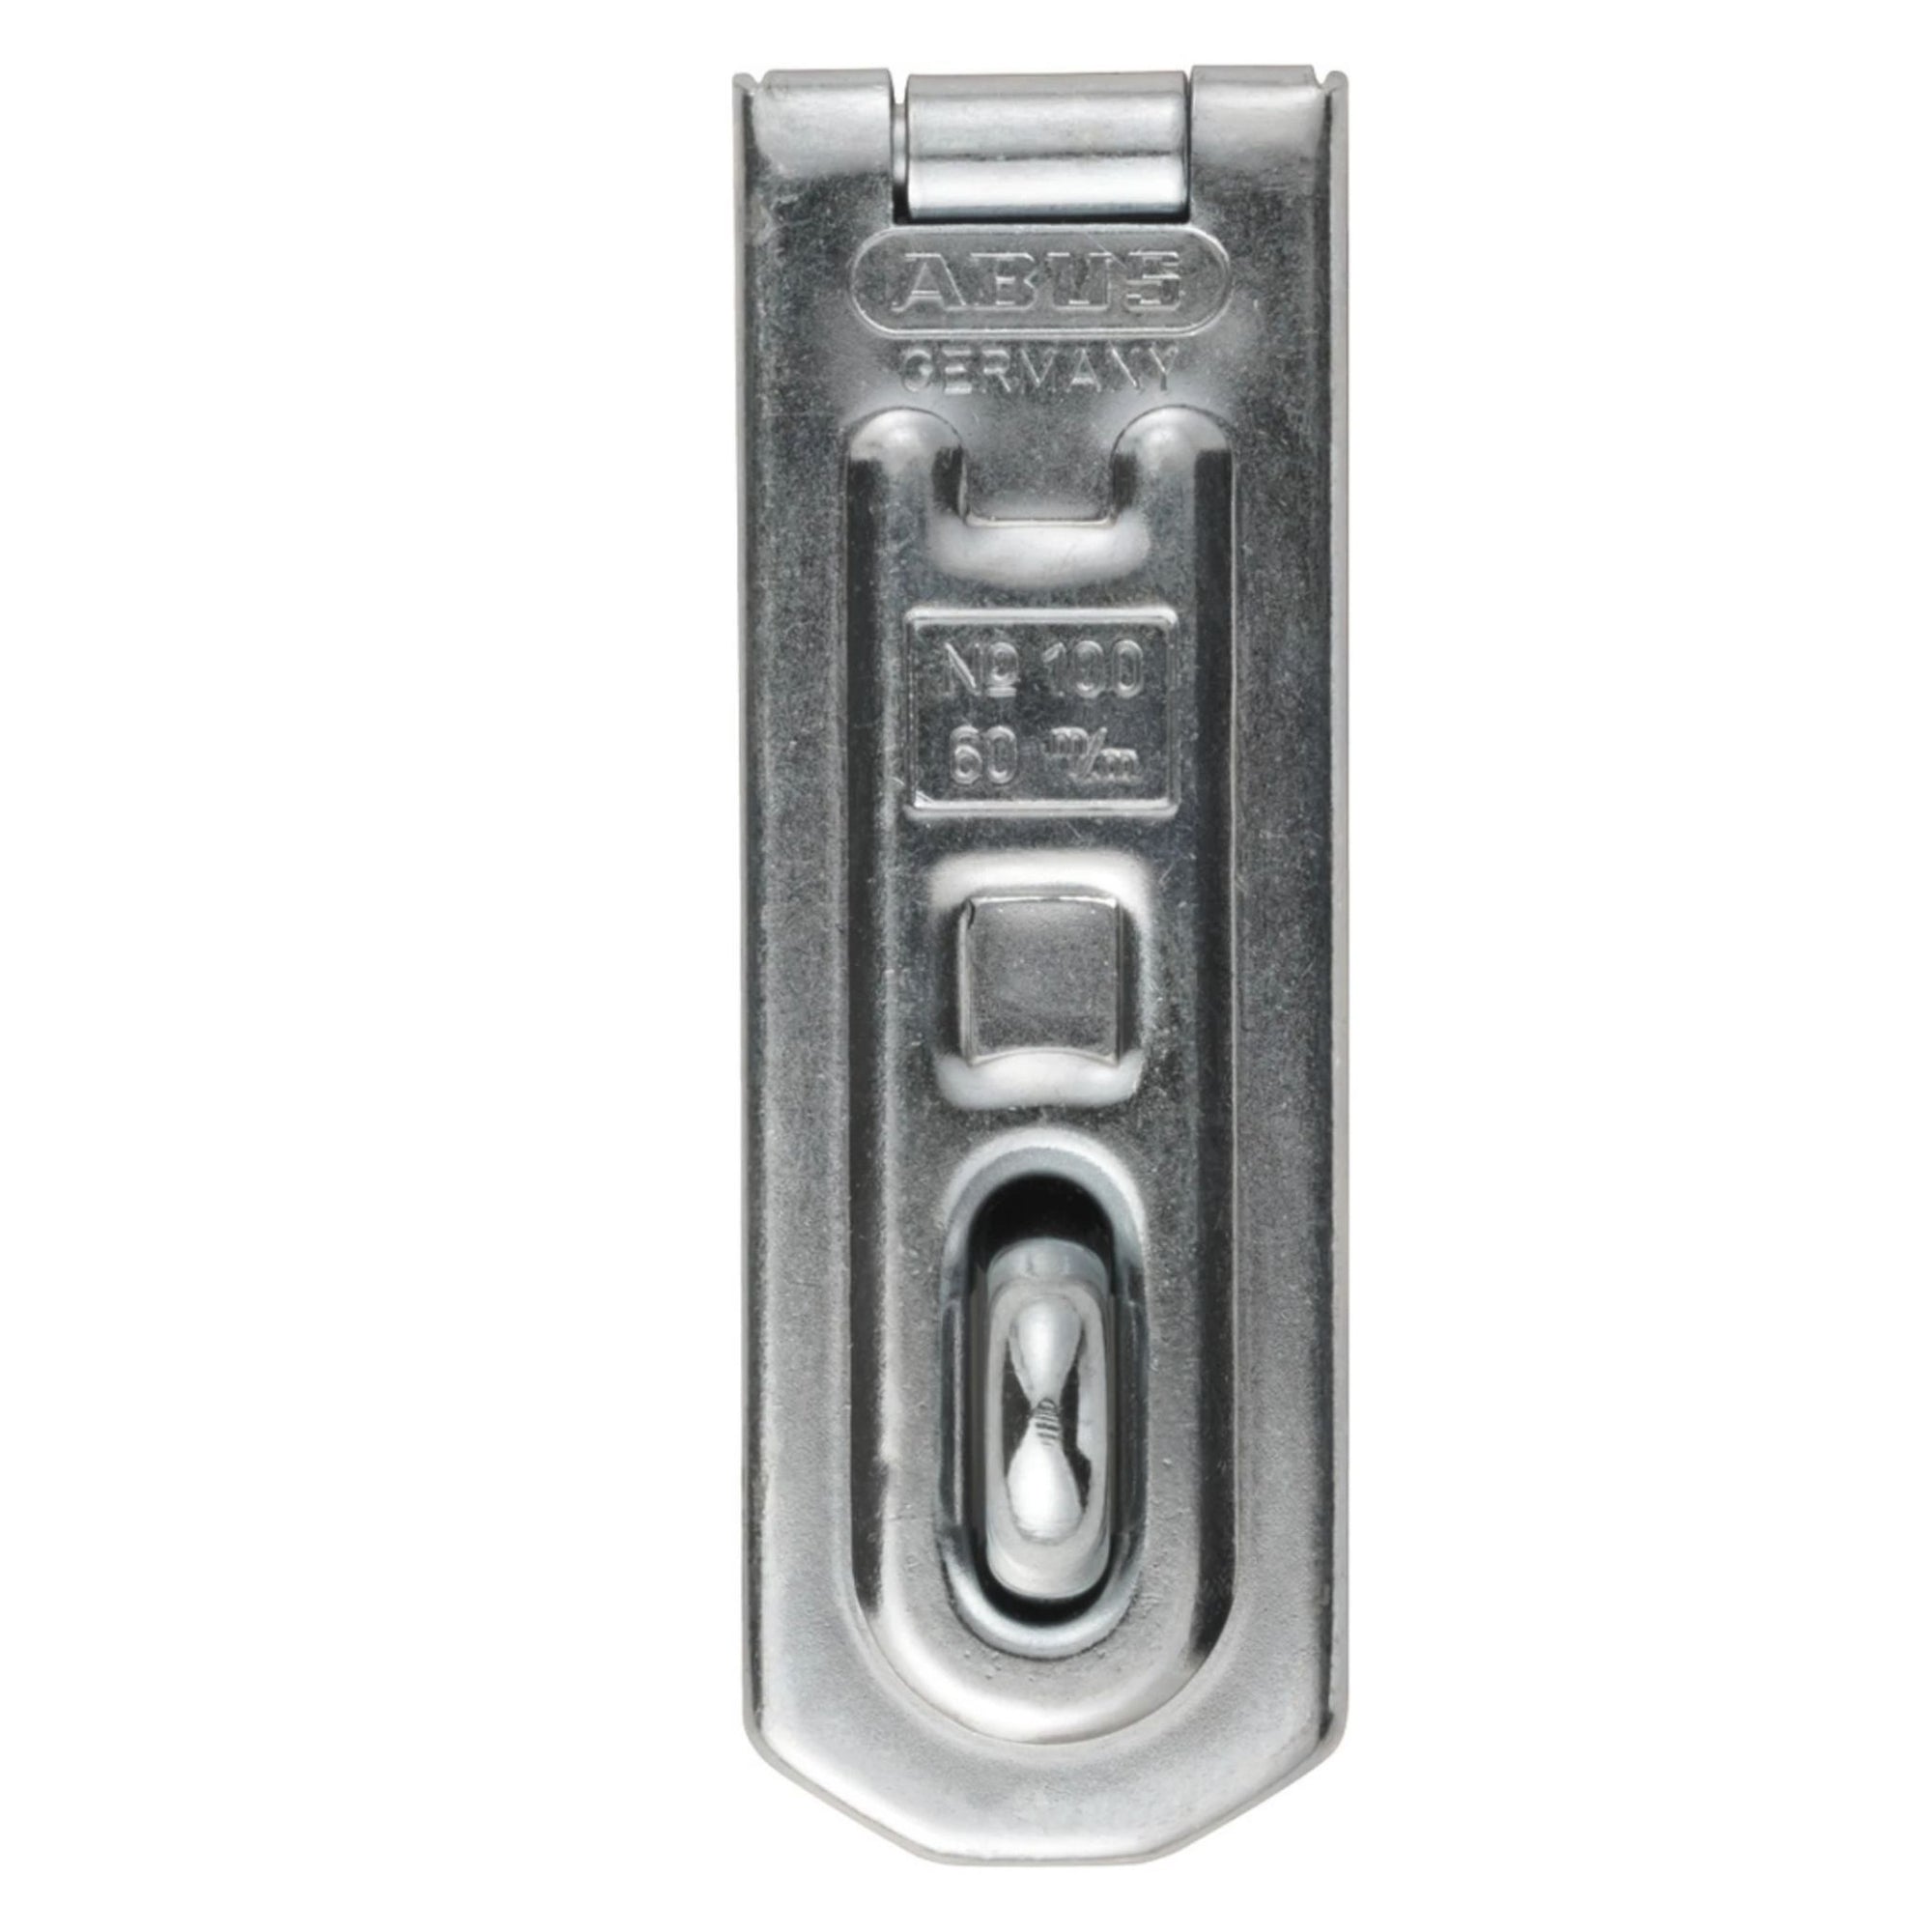 Abus Hasp 100/60 Concealed Hinge Pin Hasps - The Lock Source